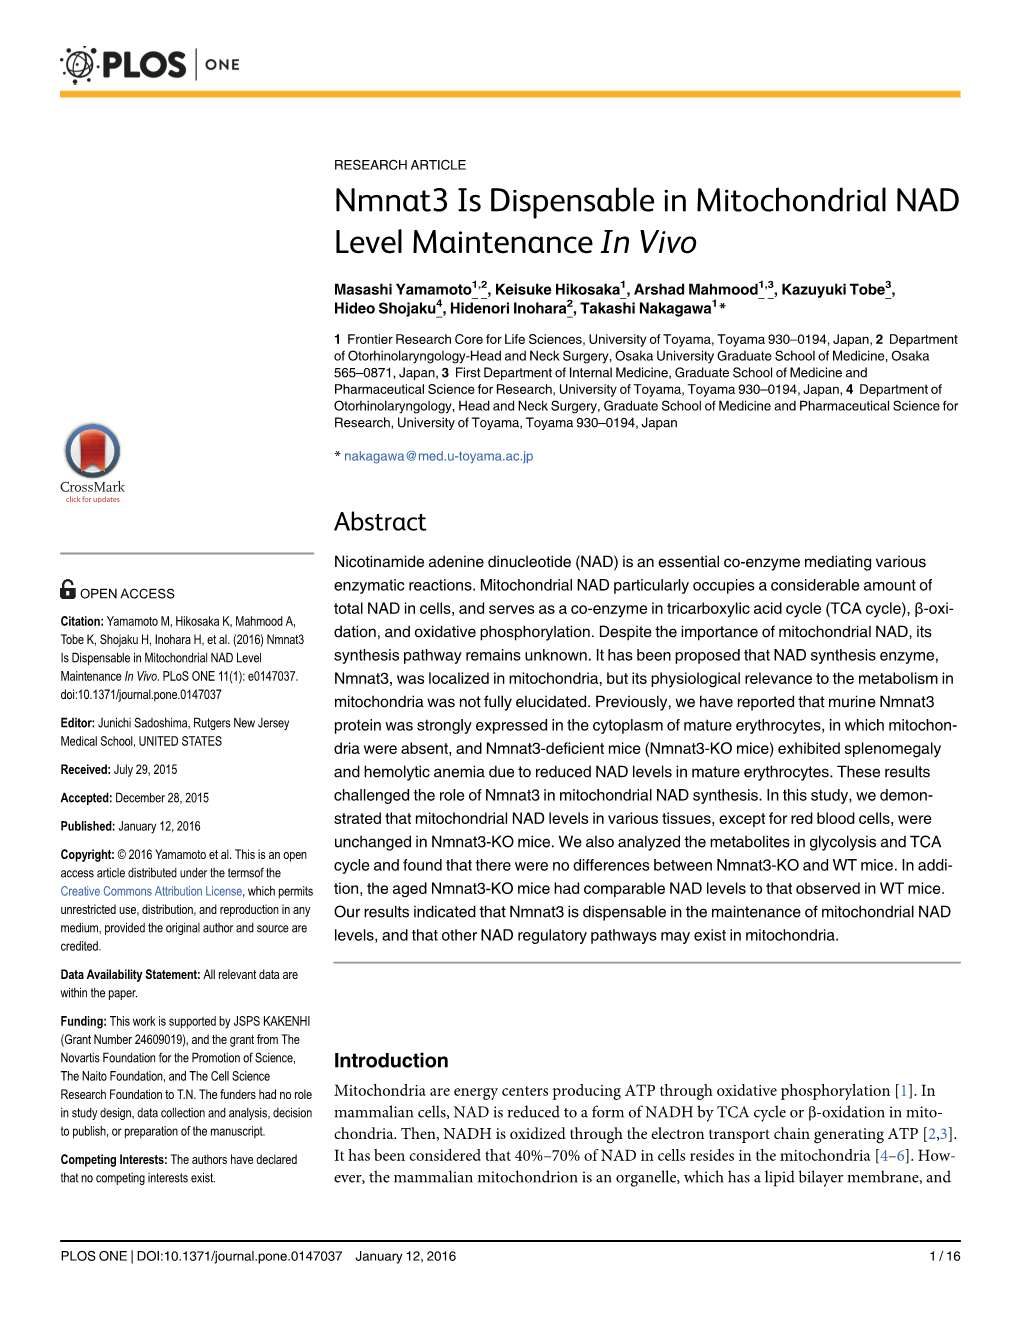 Nmnat3 Is Dispensable in Mitochondrial NAD Level Maintenance in Vivo